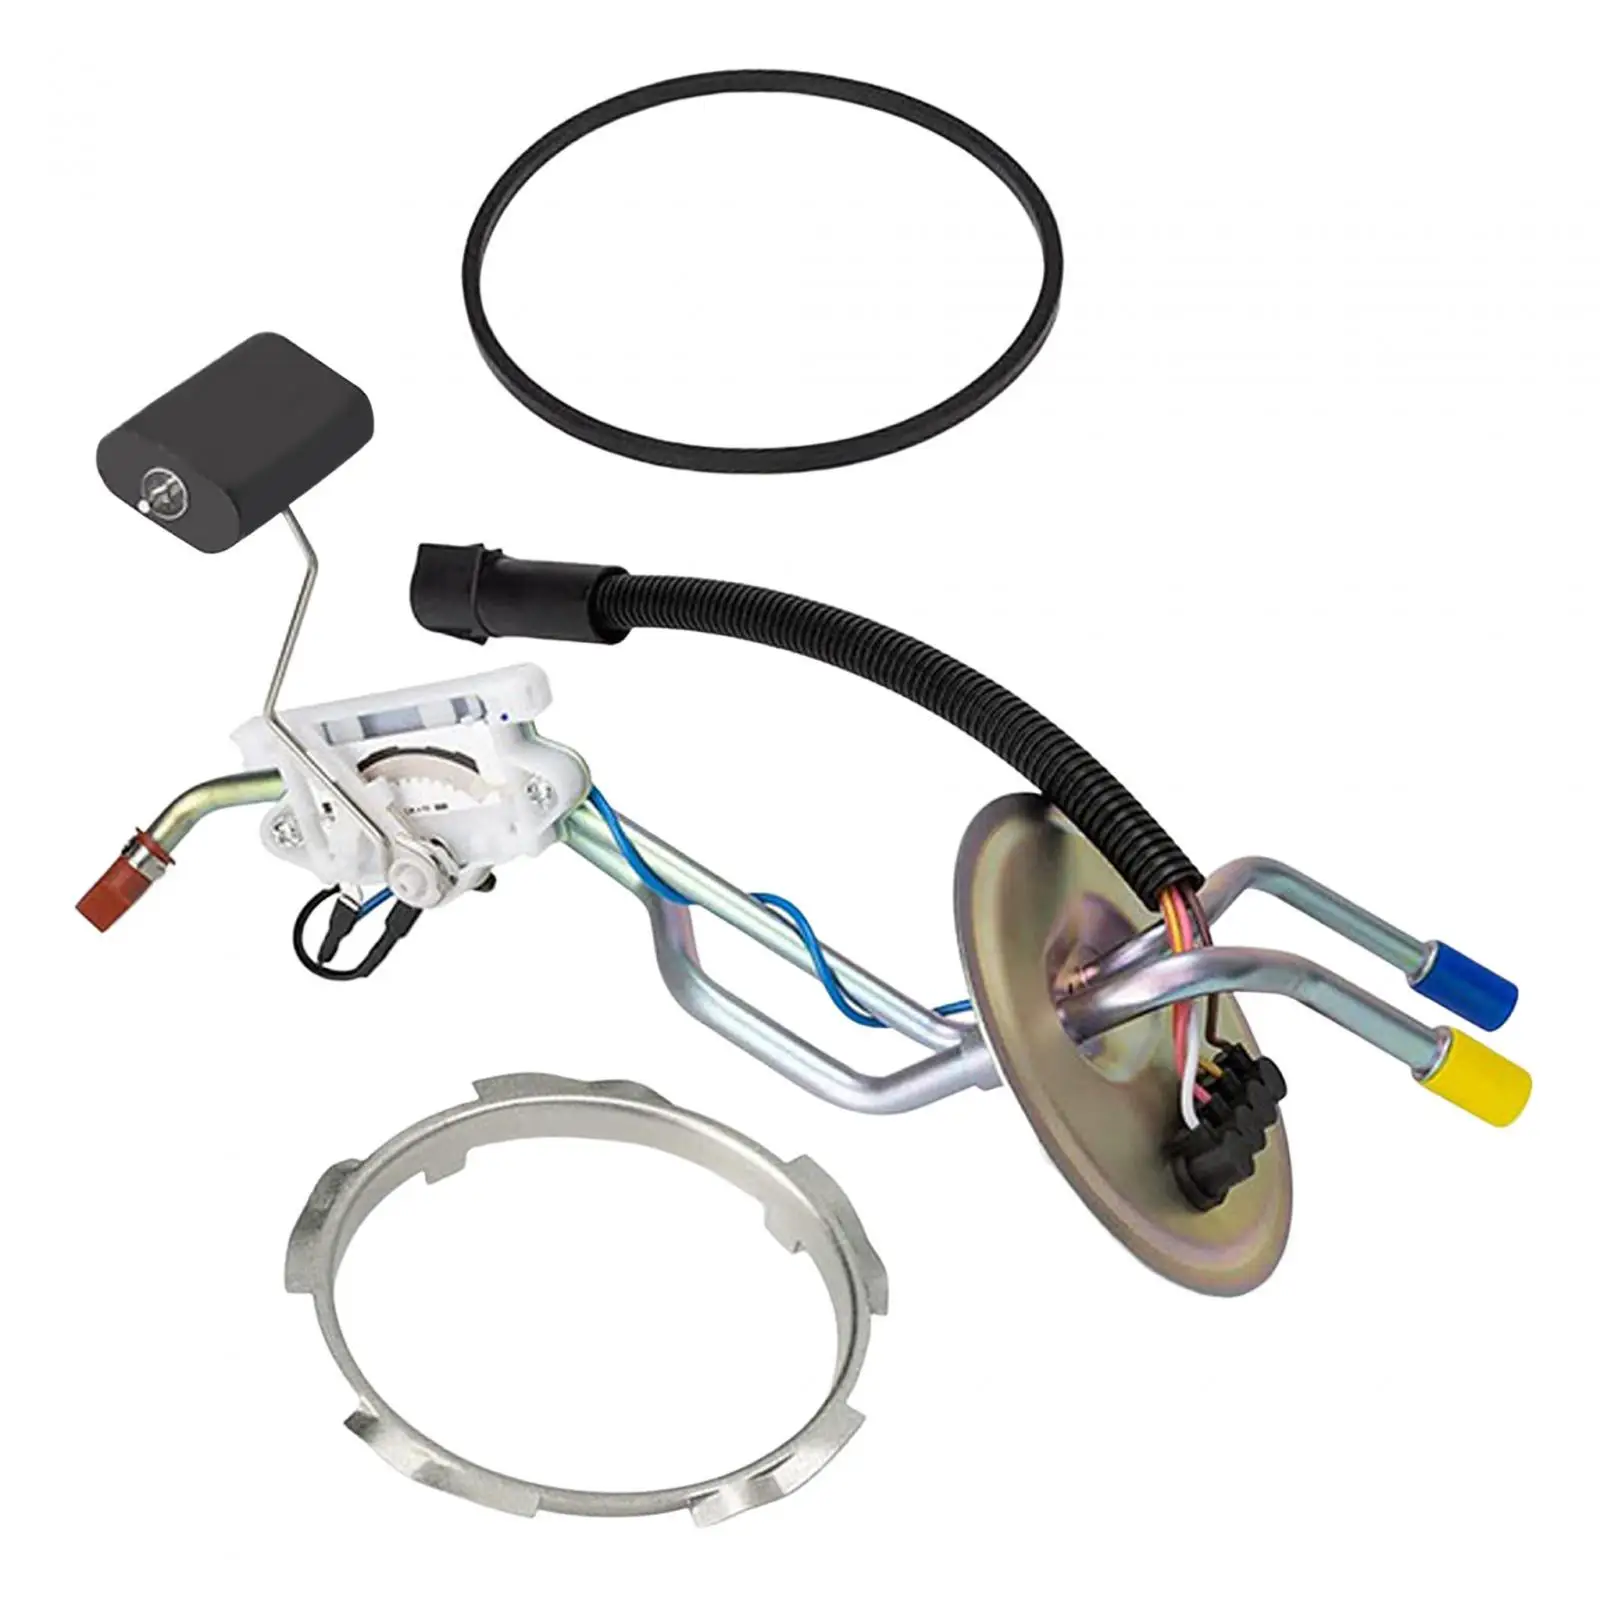 Fuel Pump Sending Unit Fmsu-9der Repair Parts for Ford F250 F350 94-97 Accessories Easily to Install Stable Performance